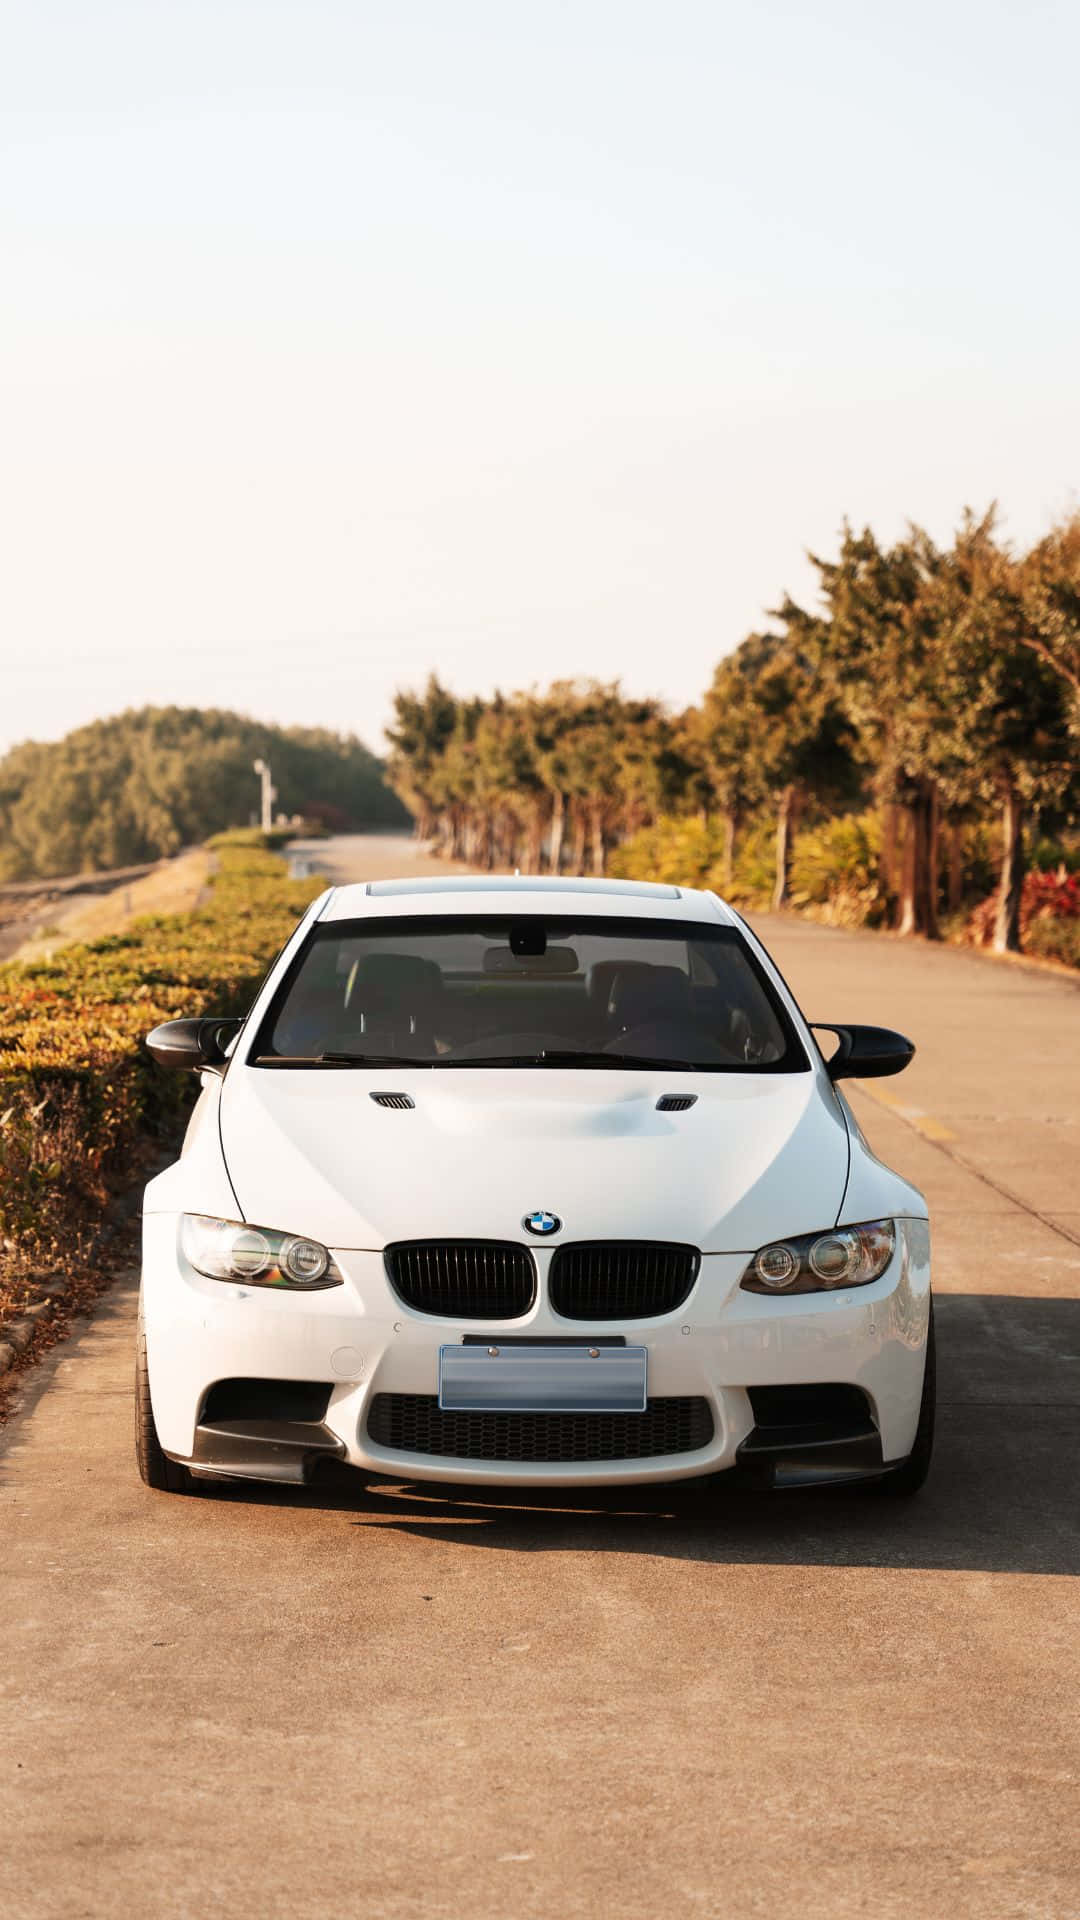 A White Bmw M3 Parked On A Road